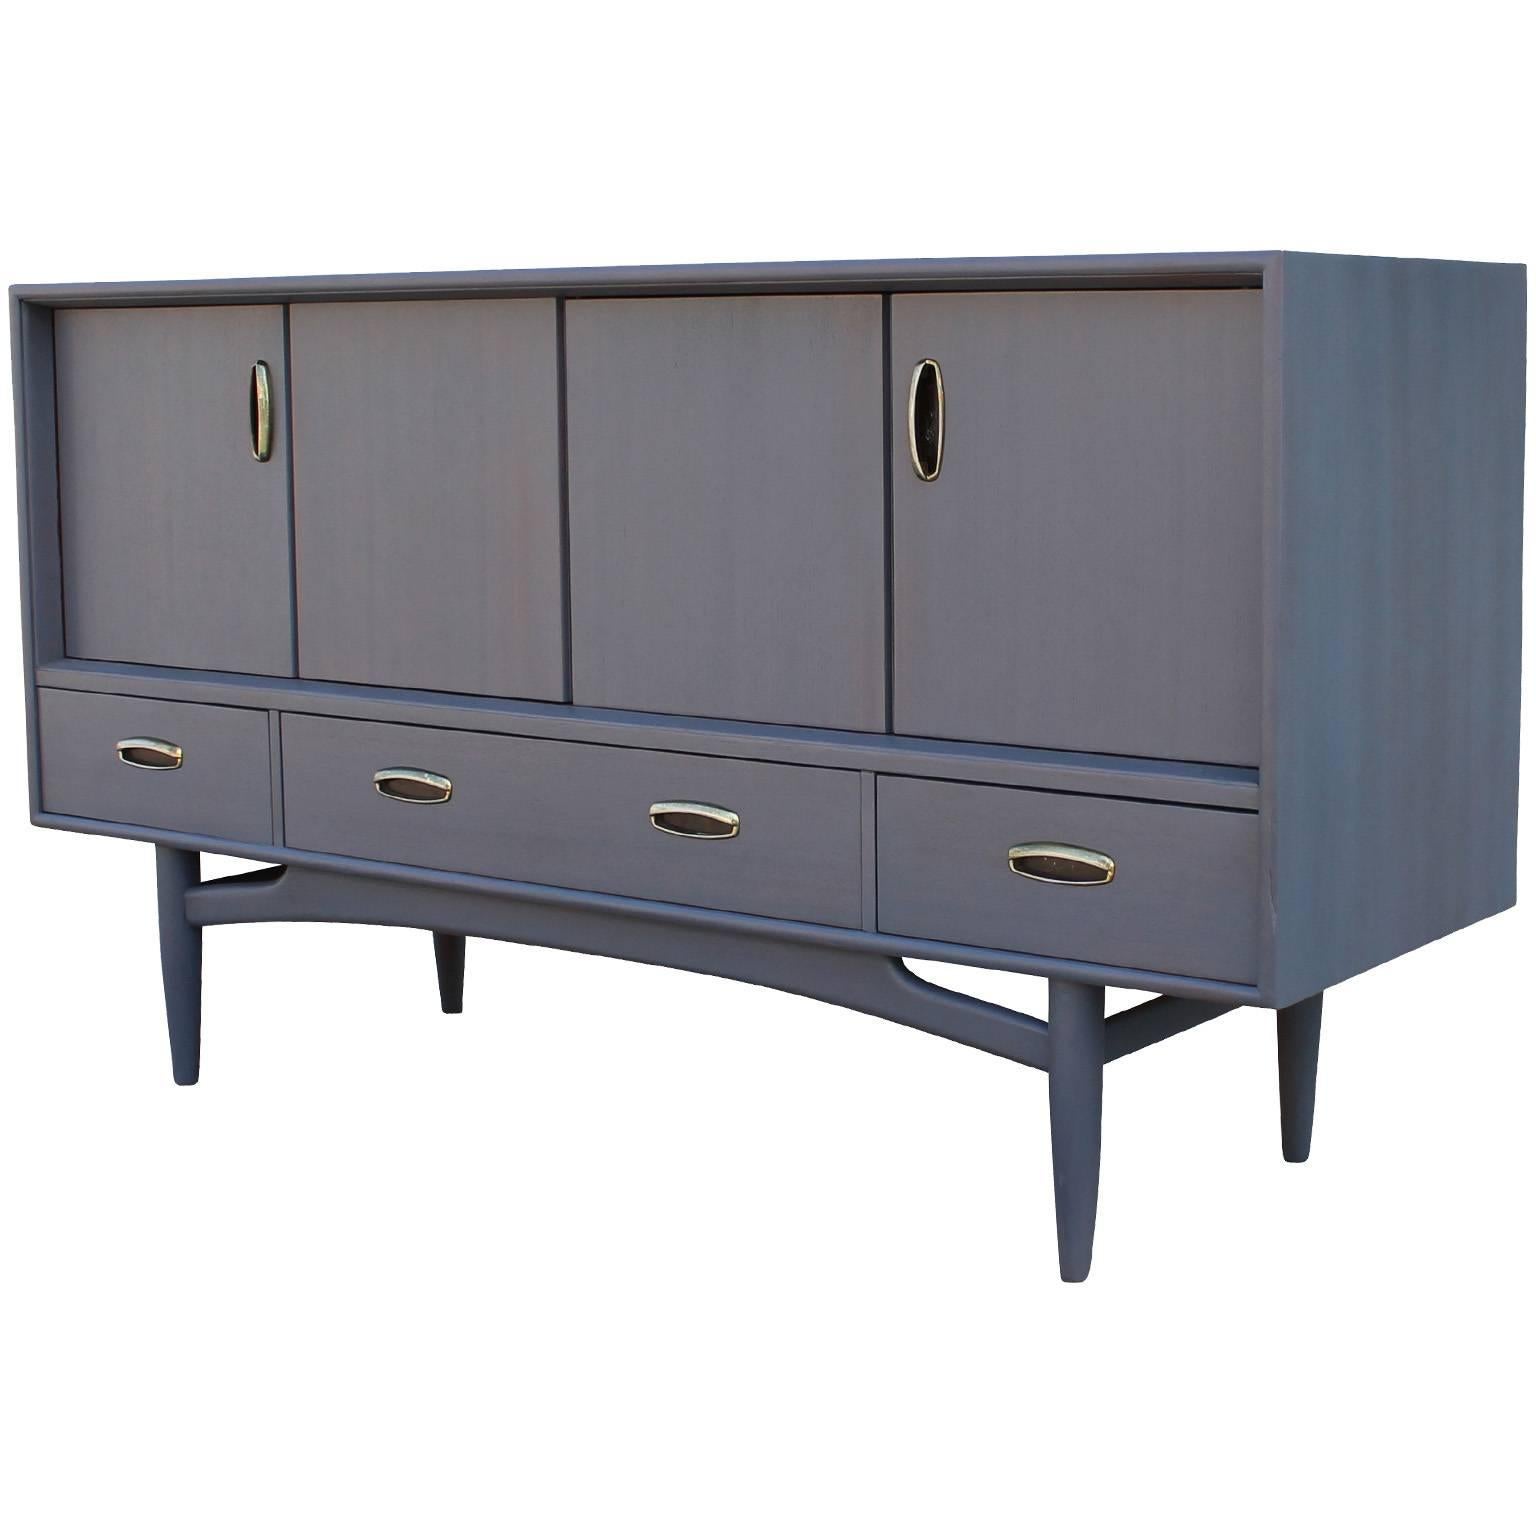 Mid-Century Modern French Blue and Grey Sideboard with Brass Hardware